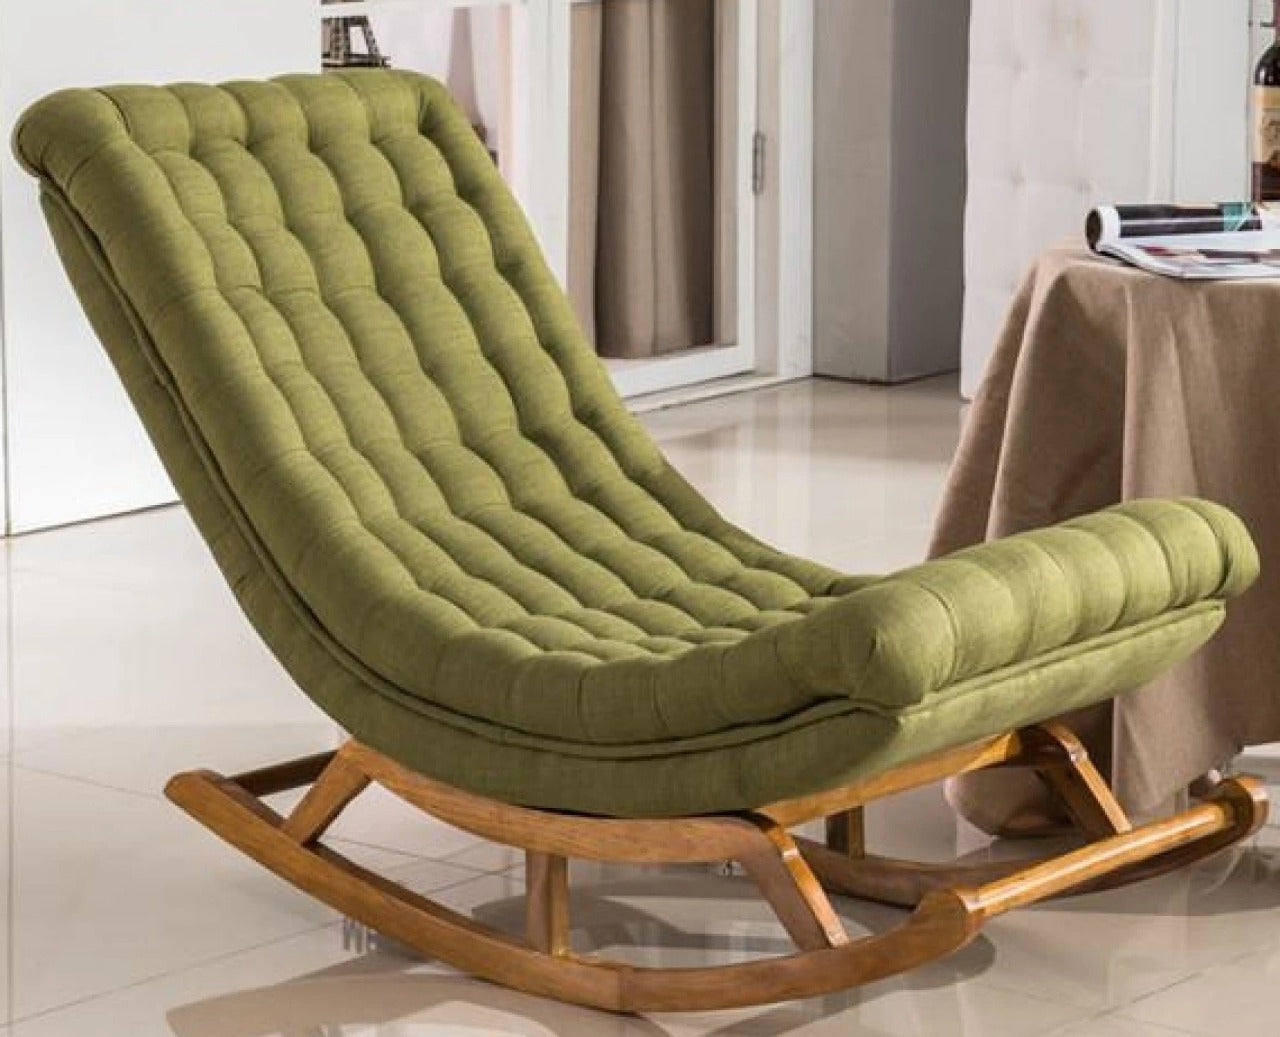 Lounge Chair: Wooden Lounge Chair For Cozy Sleep